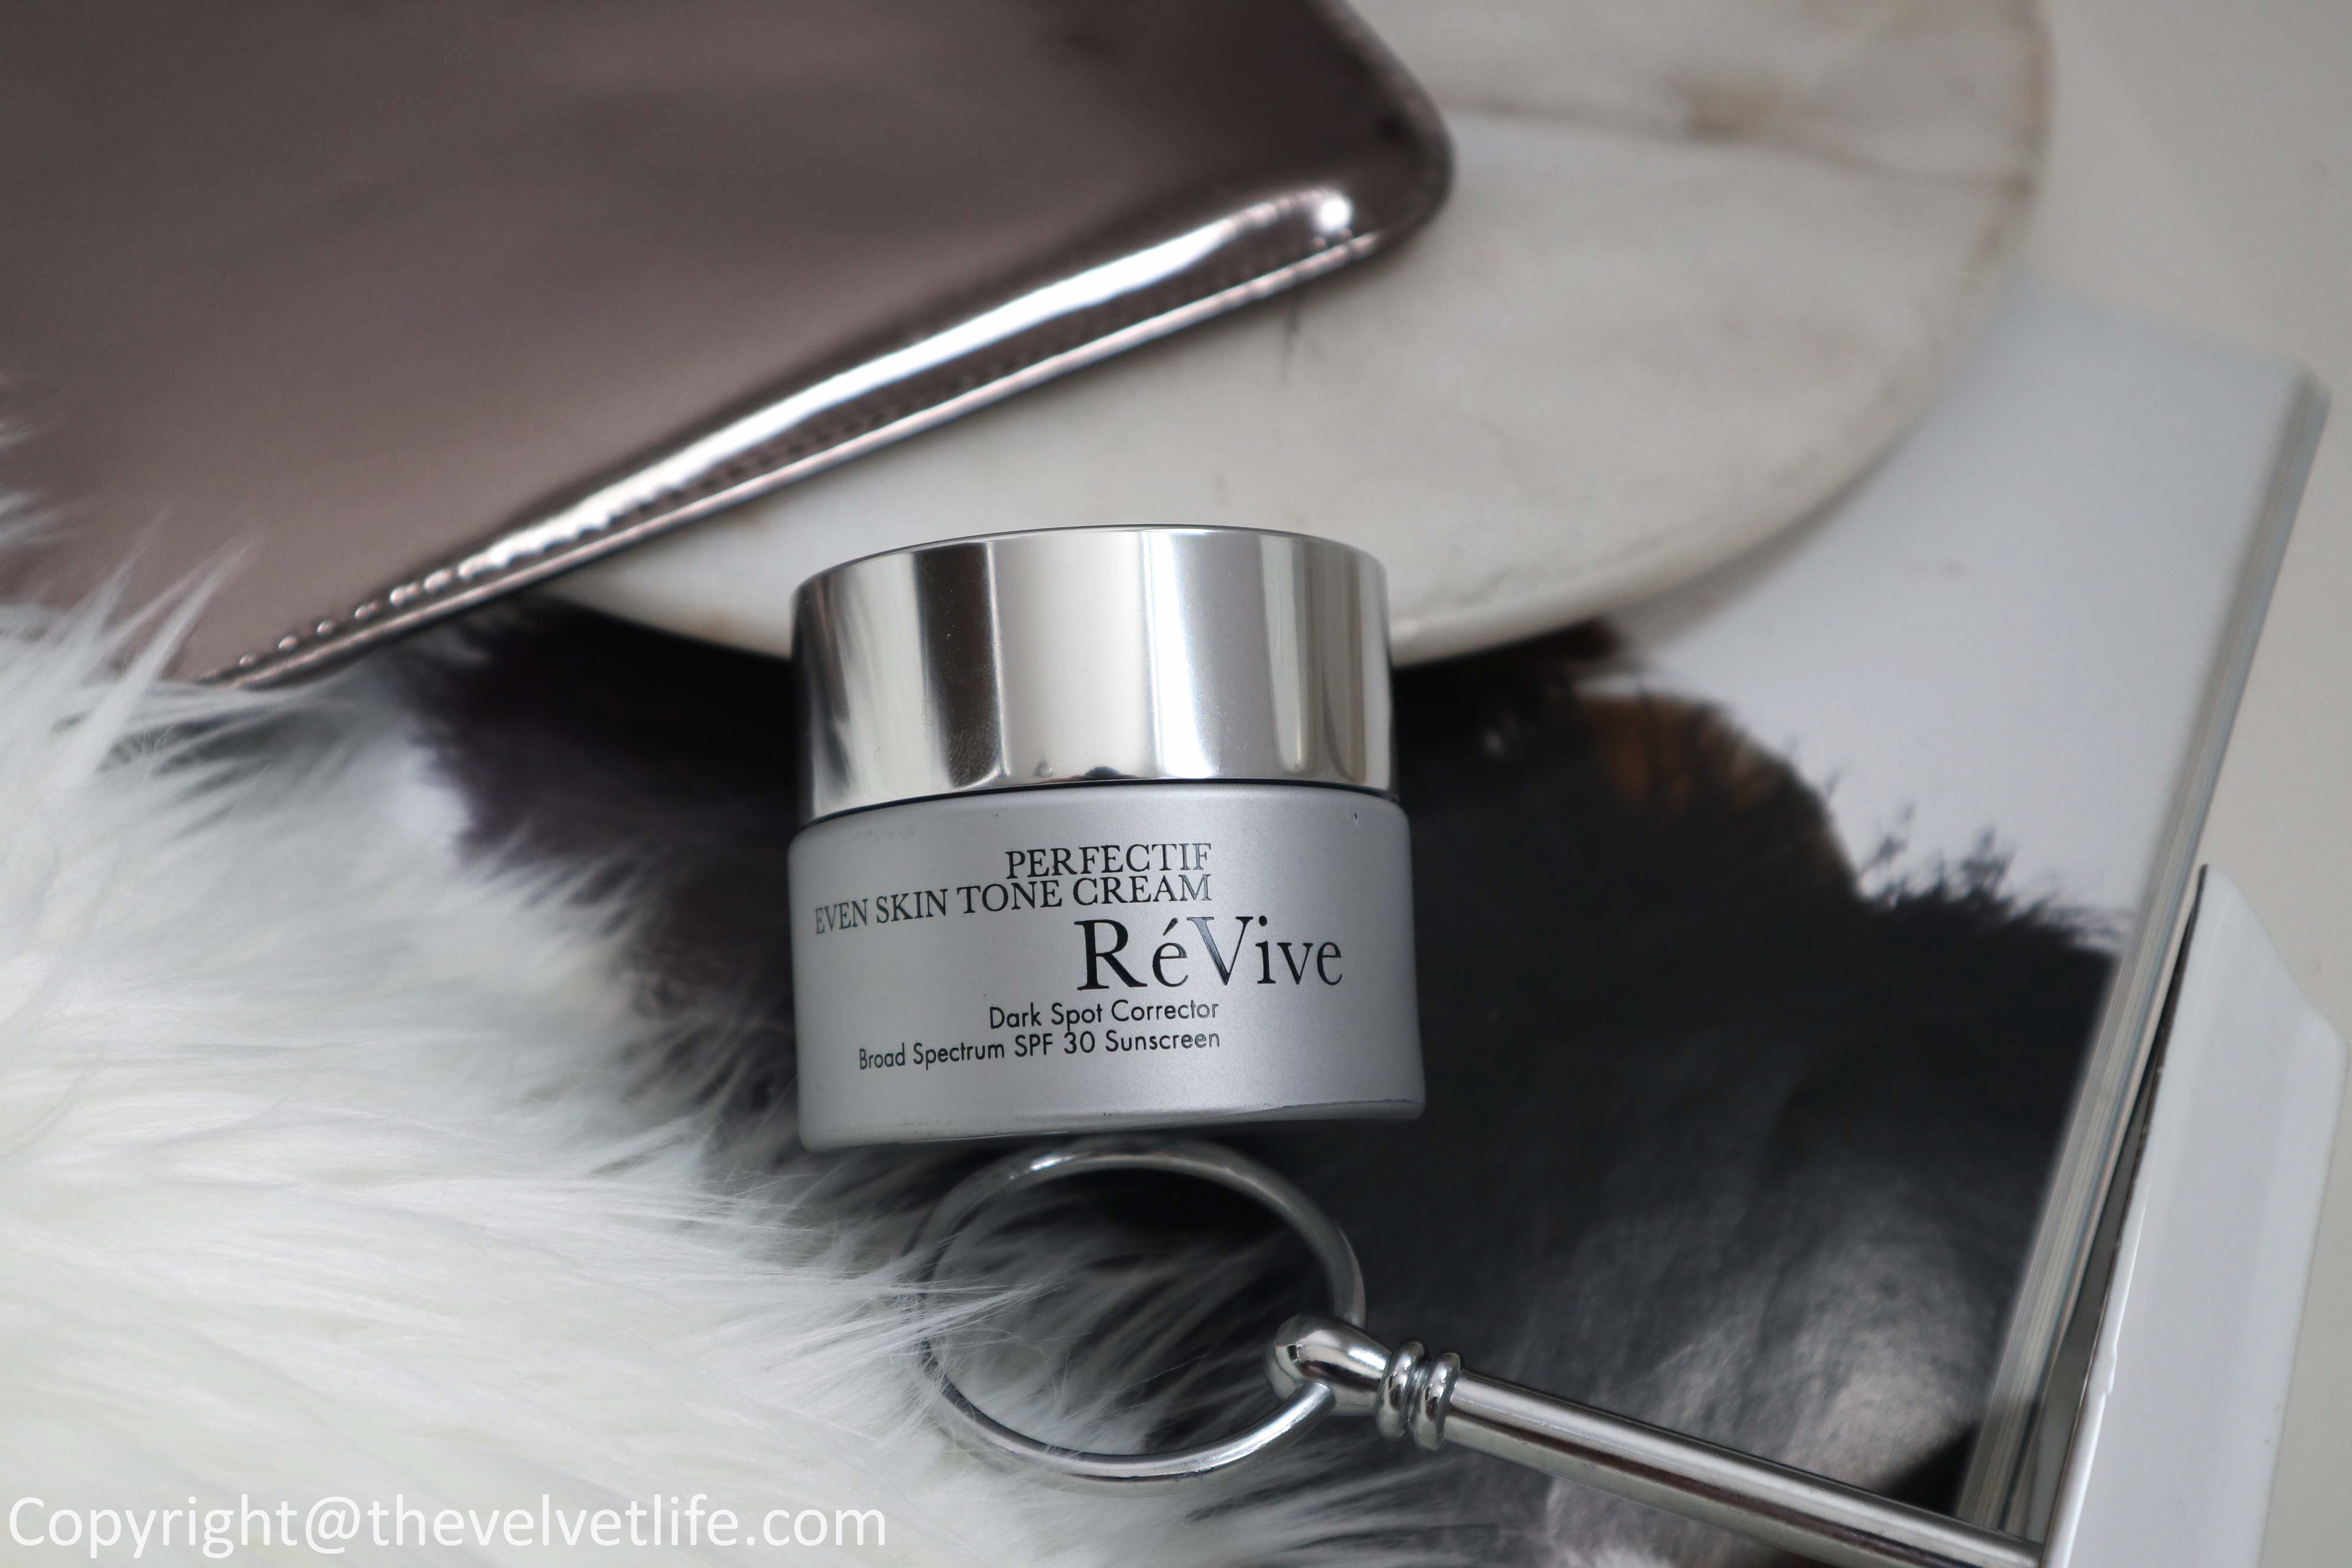 Review of new ReVive Skincare Glow Elixir Hydrating Radiance Oil, Soleil Superieur Broad Spectrum SPF 50 Sunscreen PA ++++ , Soleil Superieur Body, Perfectif Even Skin Tone Cream, Defensif Environmental Antioxidant Booster, Masque de Radiance